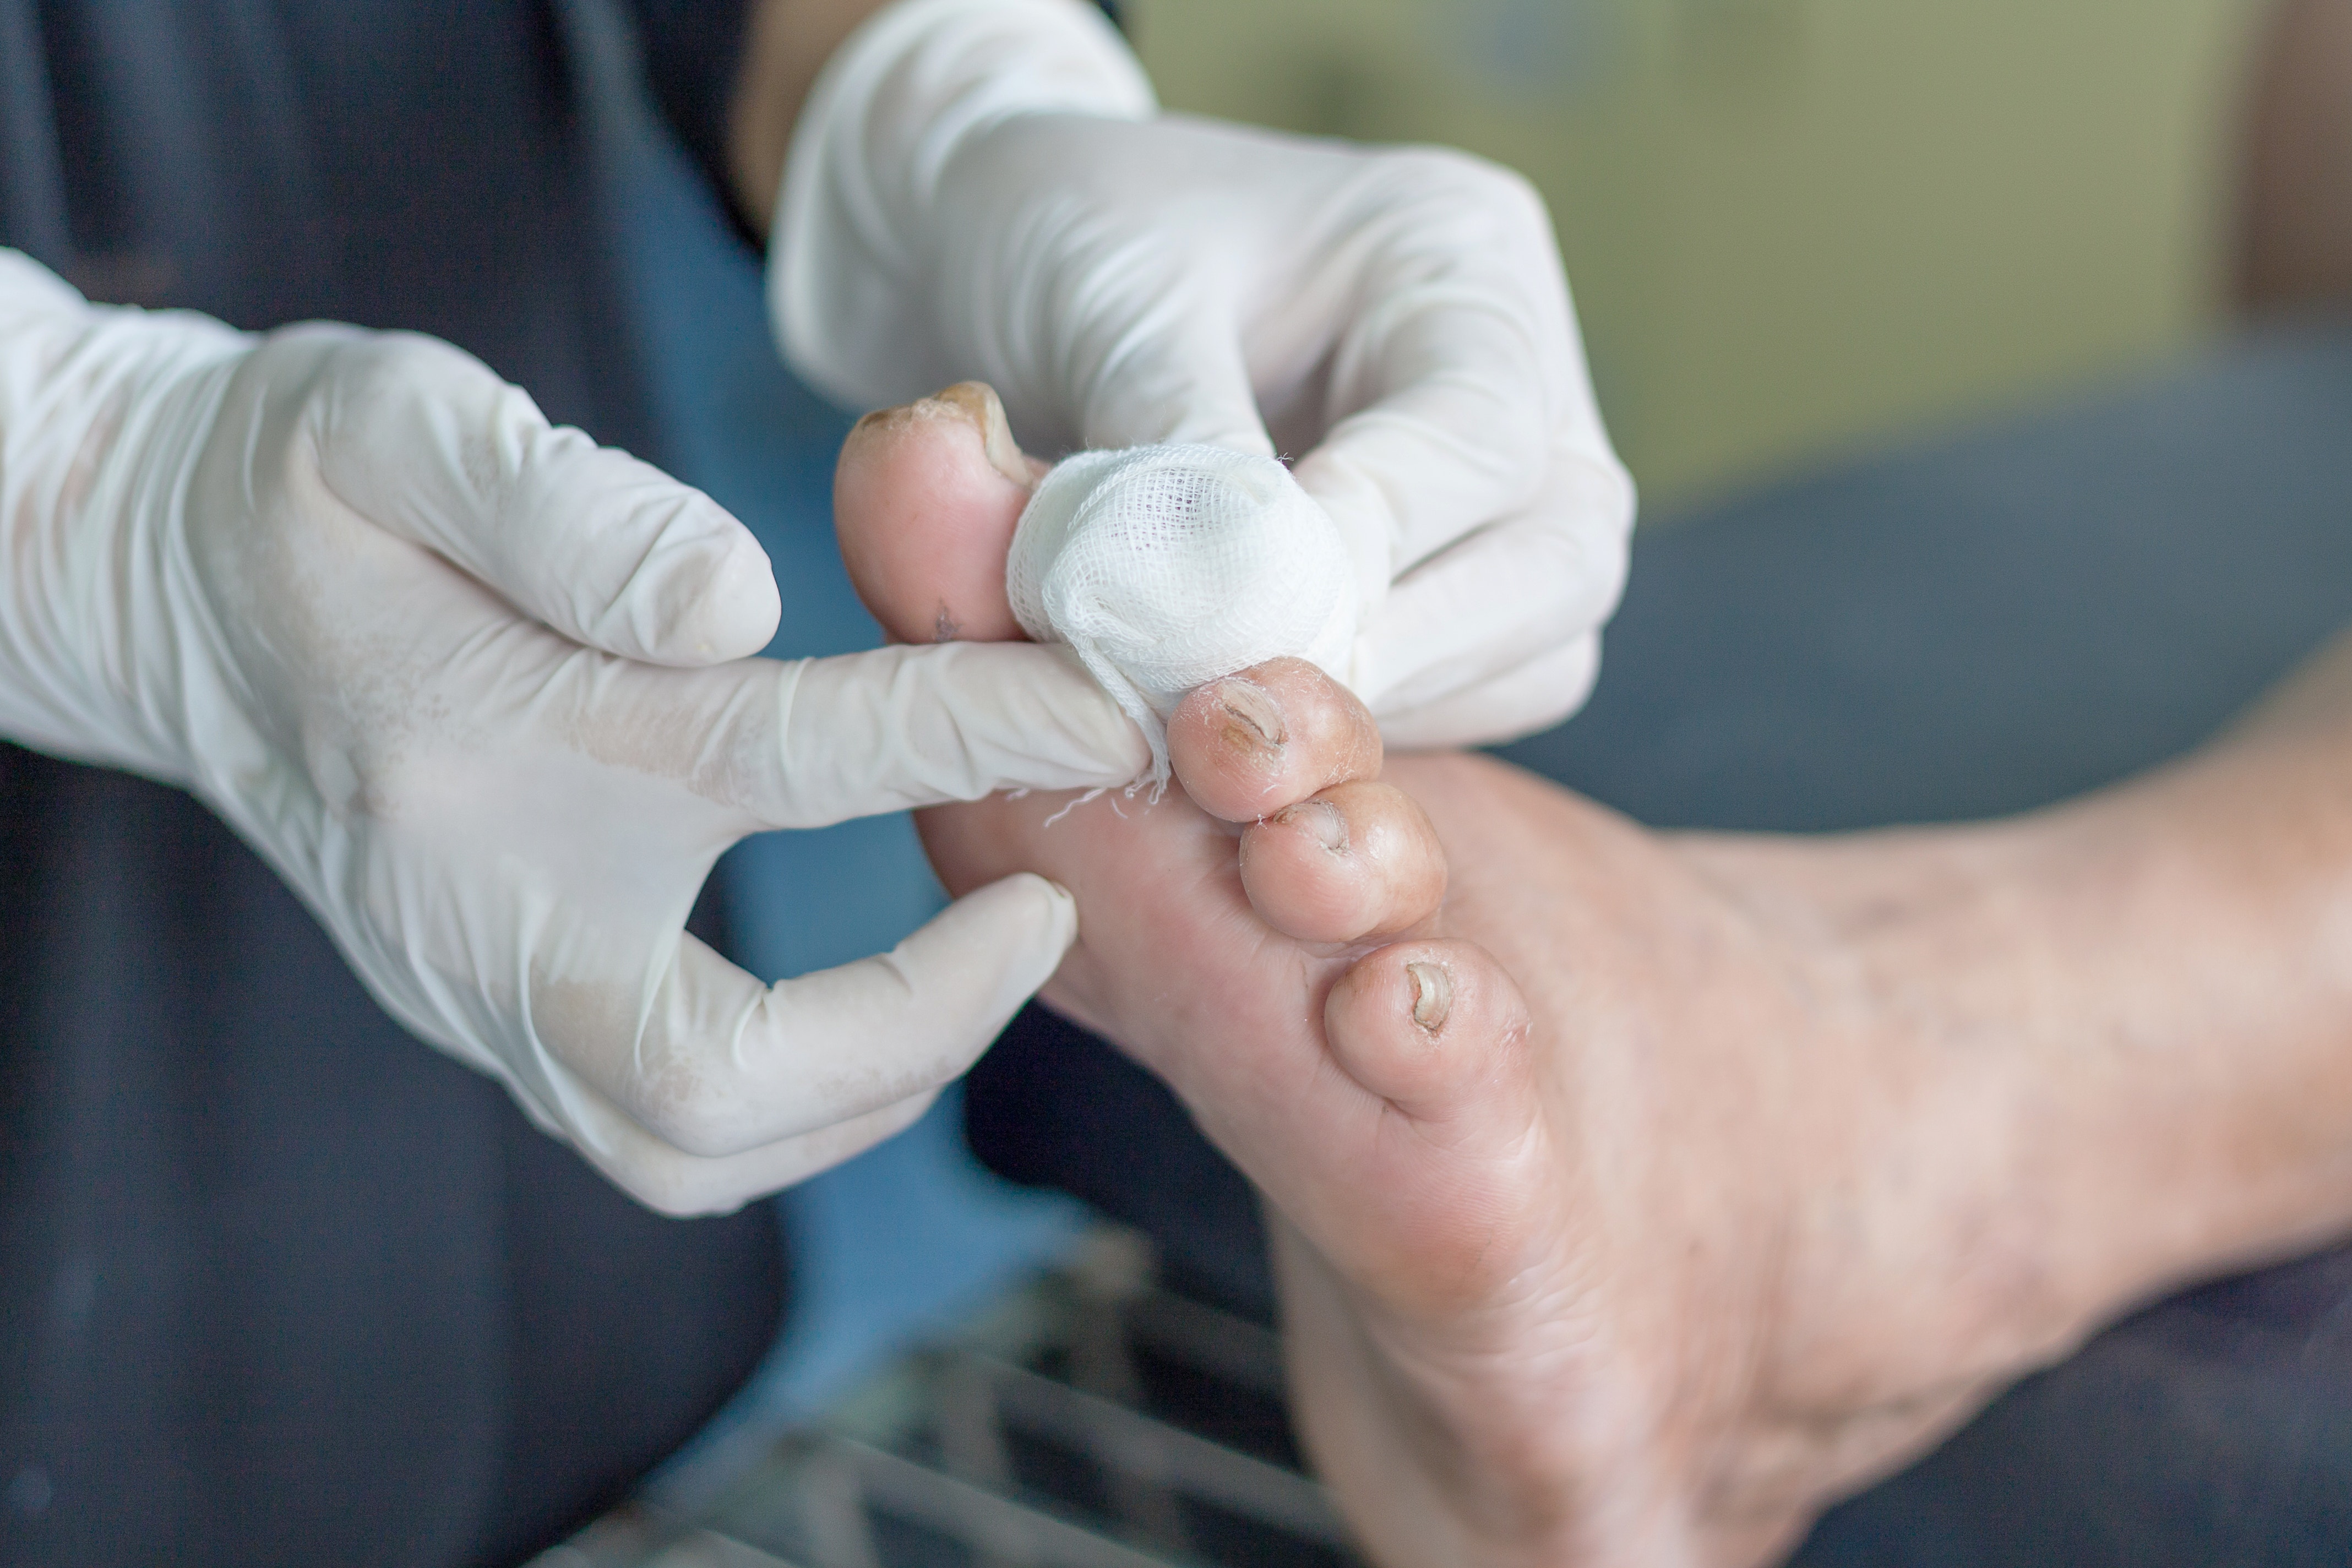 Diabetic foot ulcer treatment could kill COVID-19 virus, researchers say